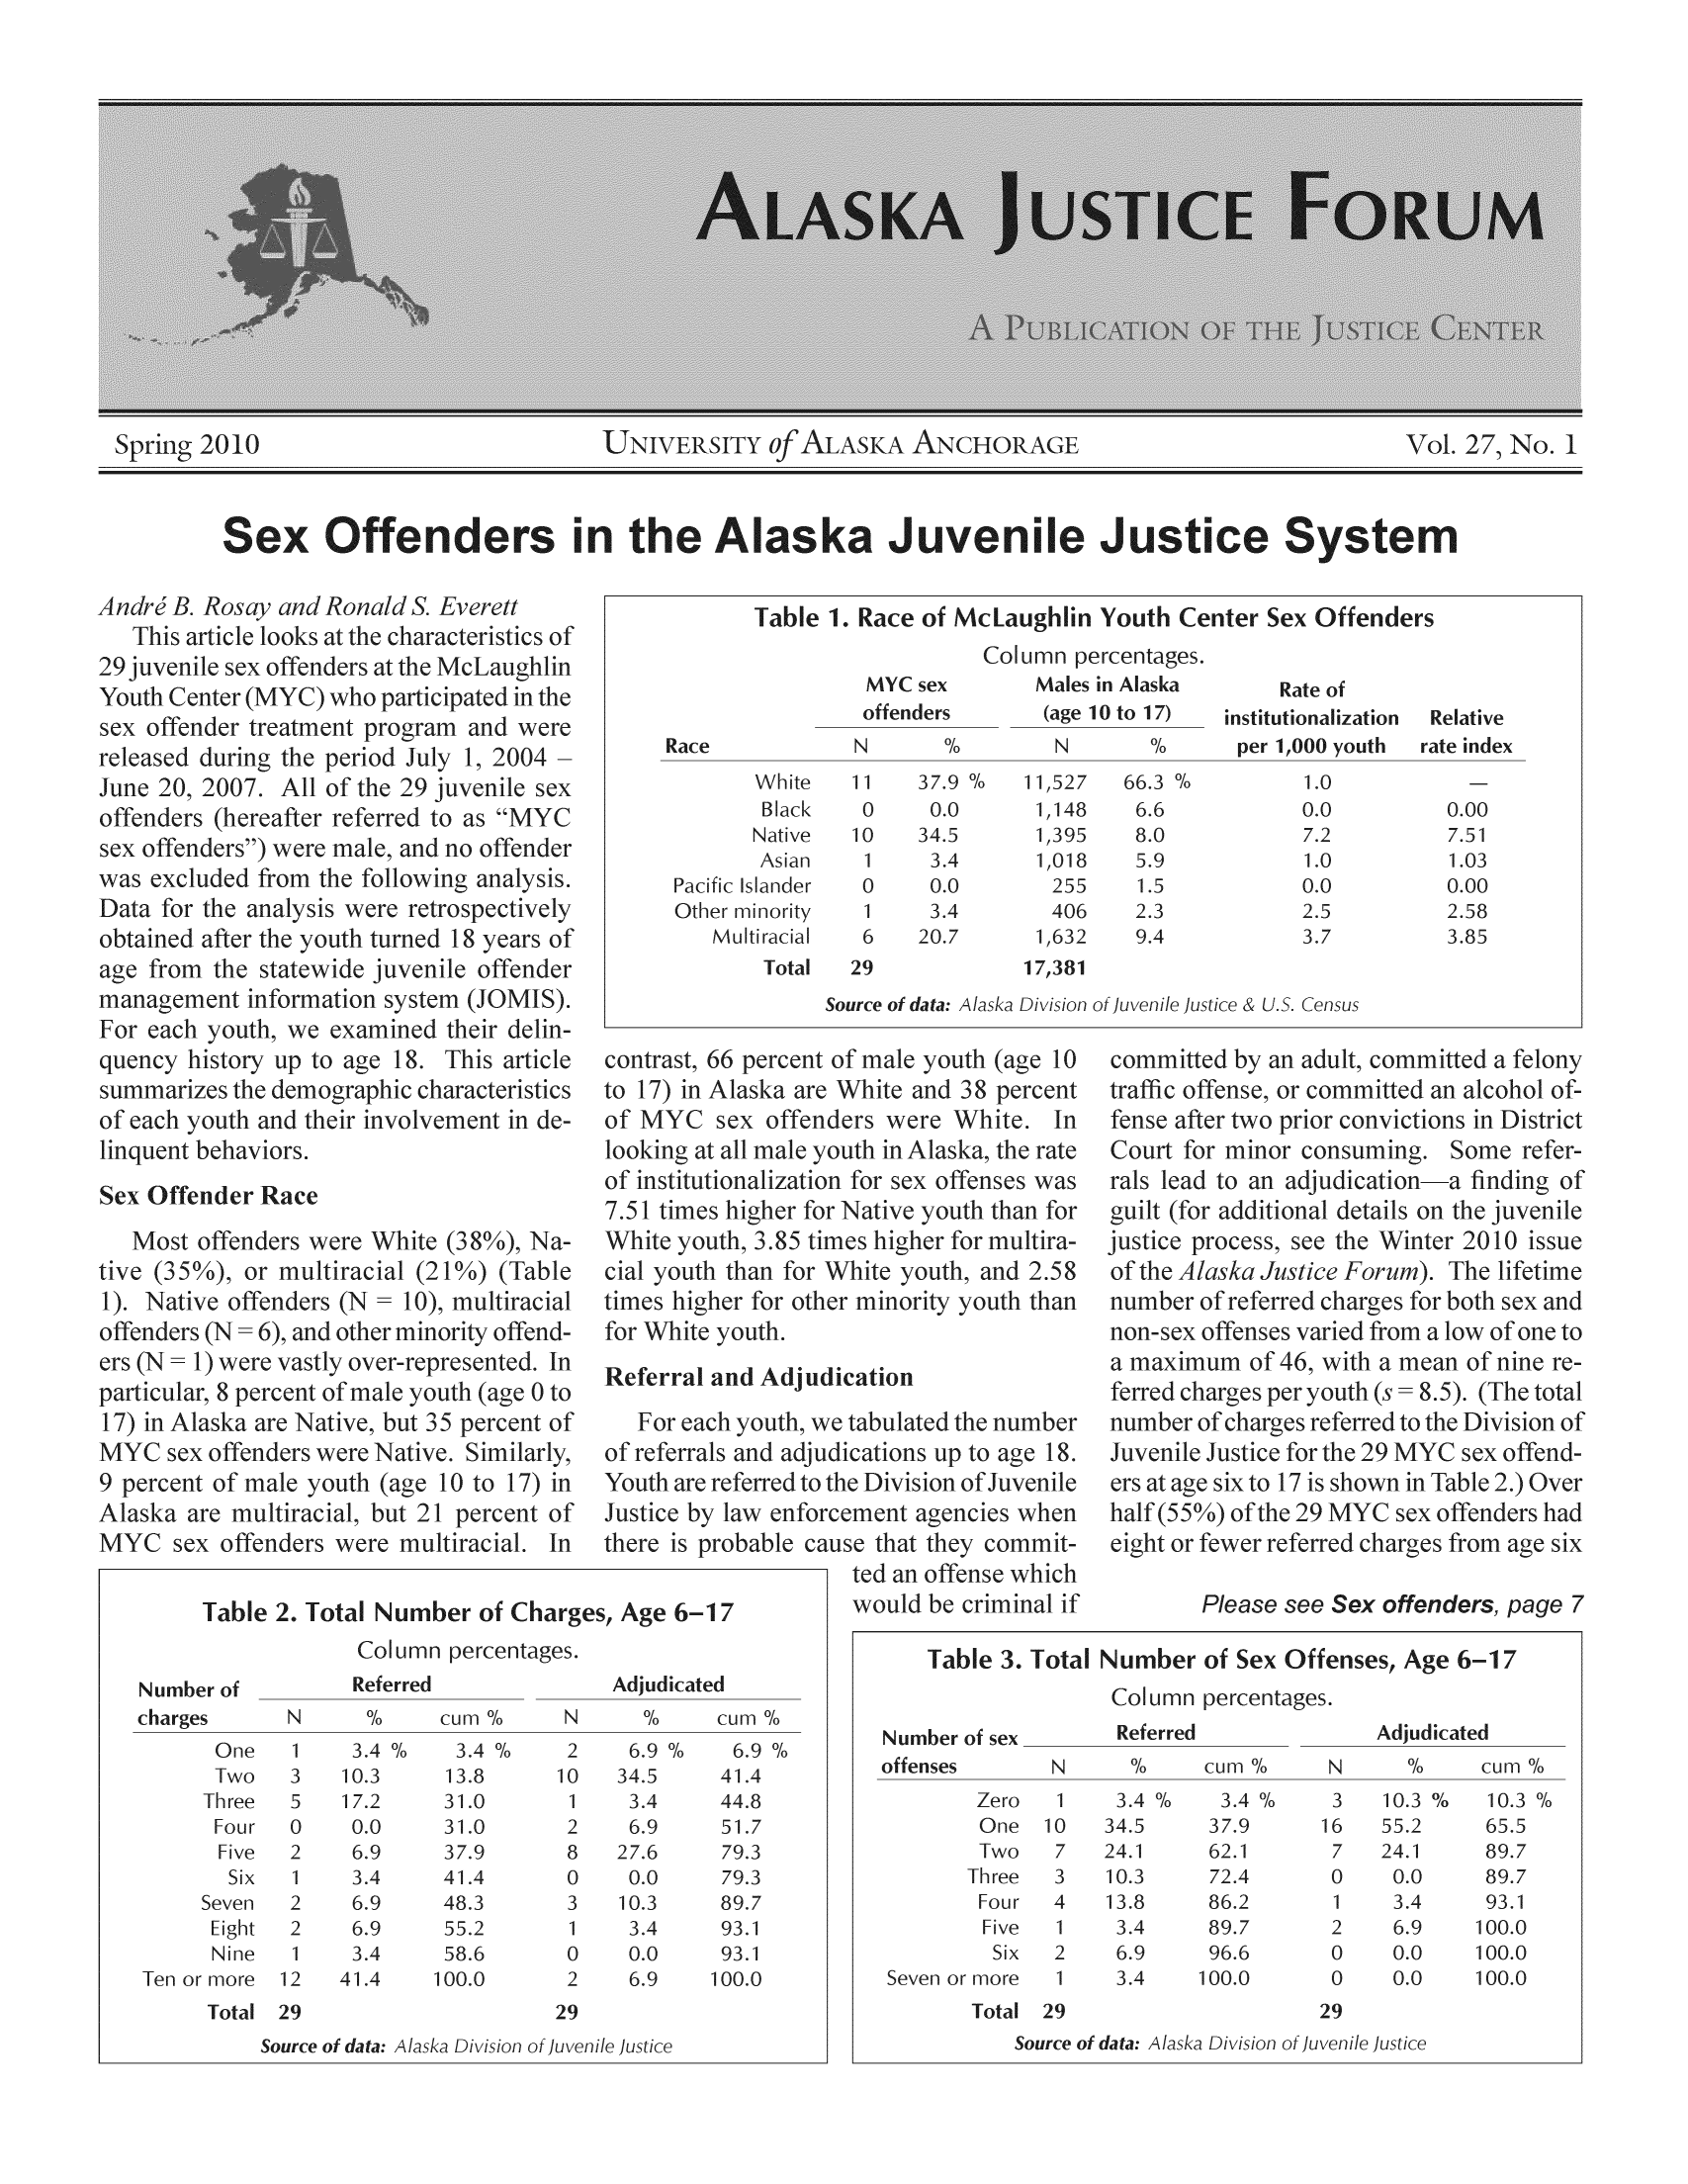 handle is hein.journals/aljufor27 and id is 1 raw text is: Spring 2010                     UNIVERSITY ofSex Offenders in the Alaska Juvenile Justice SystemTable 1. Race ofLaughlin Youth Cf'olumn percentages.ter Sex Offendeith Center (MYC) who participated in thoffender treatment program and werased during the period July 1, 2004- 20, 2007. All of the 29 juvenile se,nders (hereafter referred to as MY(offenders) were male, and no oftendeexcluded from the following analysi,;afotinefr o)spC18NIS)up to age 18.lemographic (Sex Offender Rac(1). Native offenders (Noffenders (N = 6), and others (N = 1) were vastly ov,particular, 8 percent of m,17) in Alaska are Native,MYC sex offenders were9 percent of male youther for Native you.85 times higher ftpreseouth (35 peve. Siffend-  foted. InR- ,- A .&X offenders were multiracial, hTable 2. Total Number of Char;her ftLdiudicatioE)f referrals aiYouth are refelustice by IaN;here is prob., Age 6-17.58   of,an   nunoia nferpr:f4s pCamber of charges refupalf (55%)Ight or fevforbmean= 8.5.for the 2917 is showre 29 MYCse see Sex offenders,Table 3. TotalJumber of Sex OF data:fUITf data:percerfaska a21,x 0offe38 petraffic offfense afteSome refflifese))fo0aIabloffe5froses, Age 6-1f data: